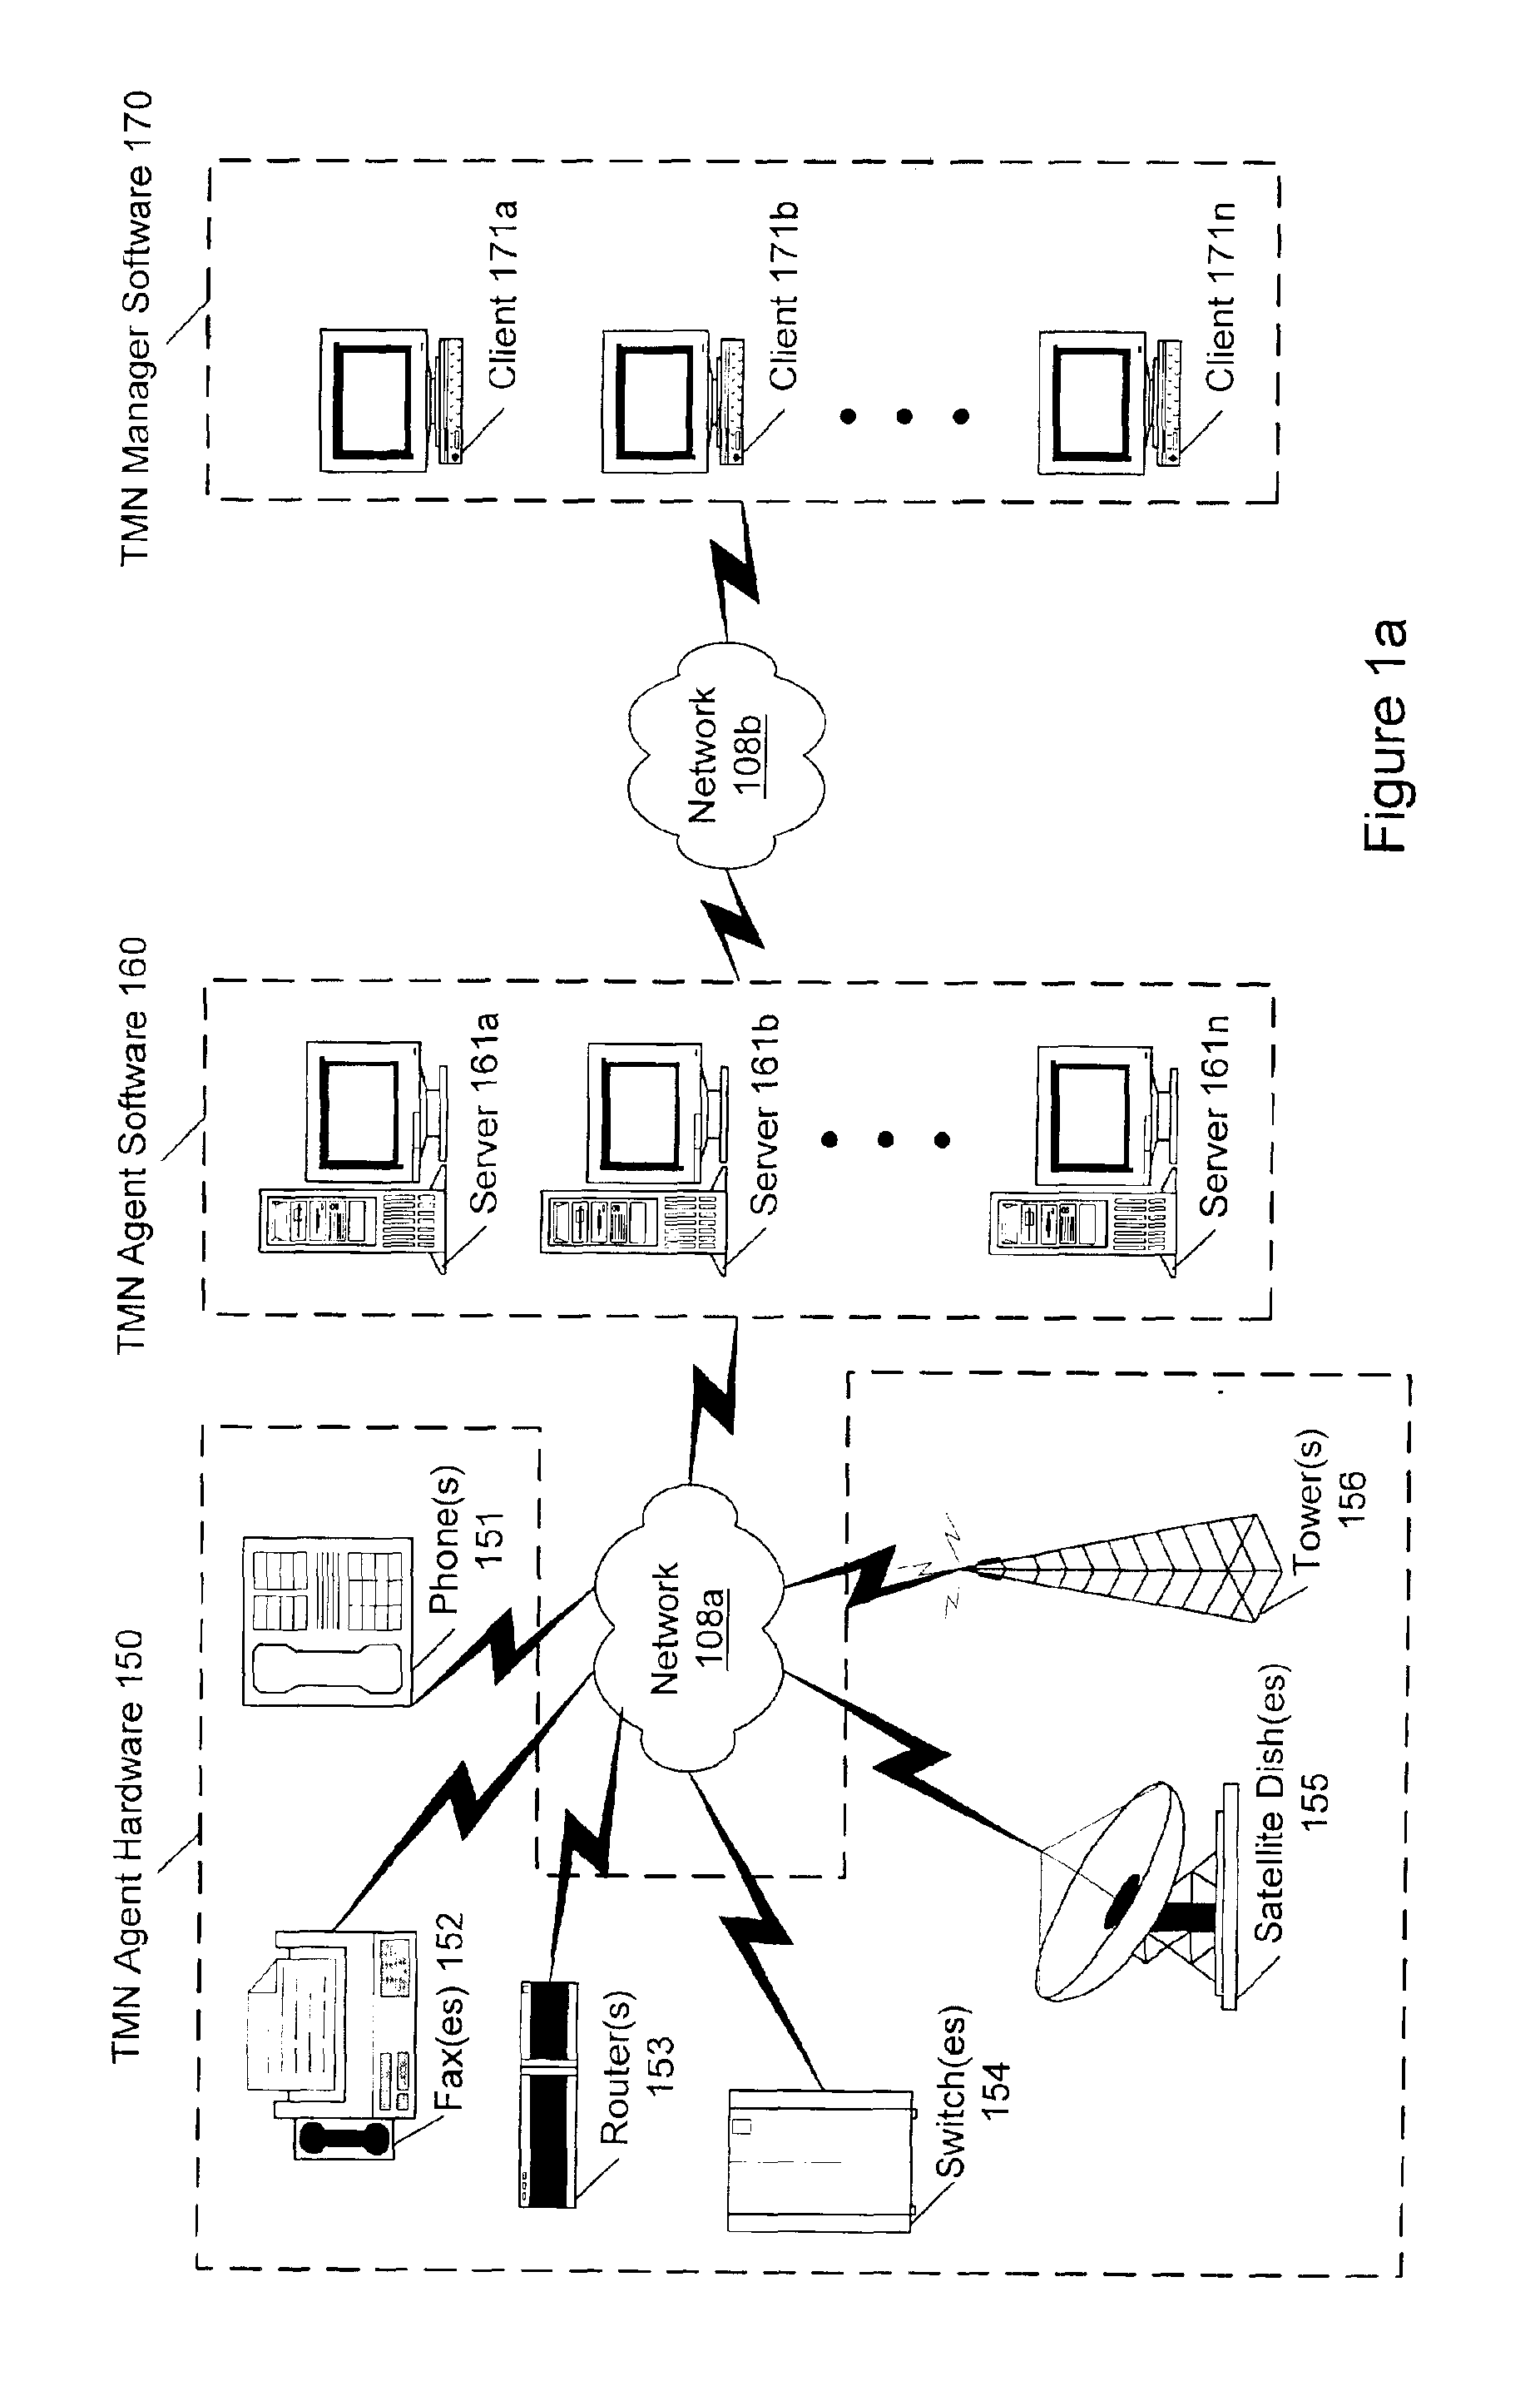 Pluggable authentication modules for telecommunications management network